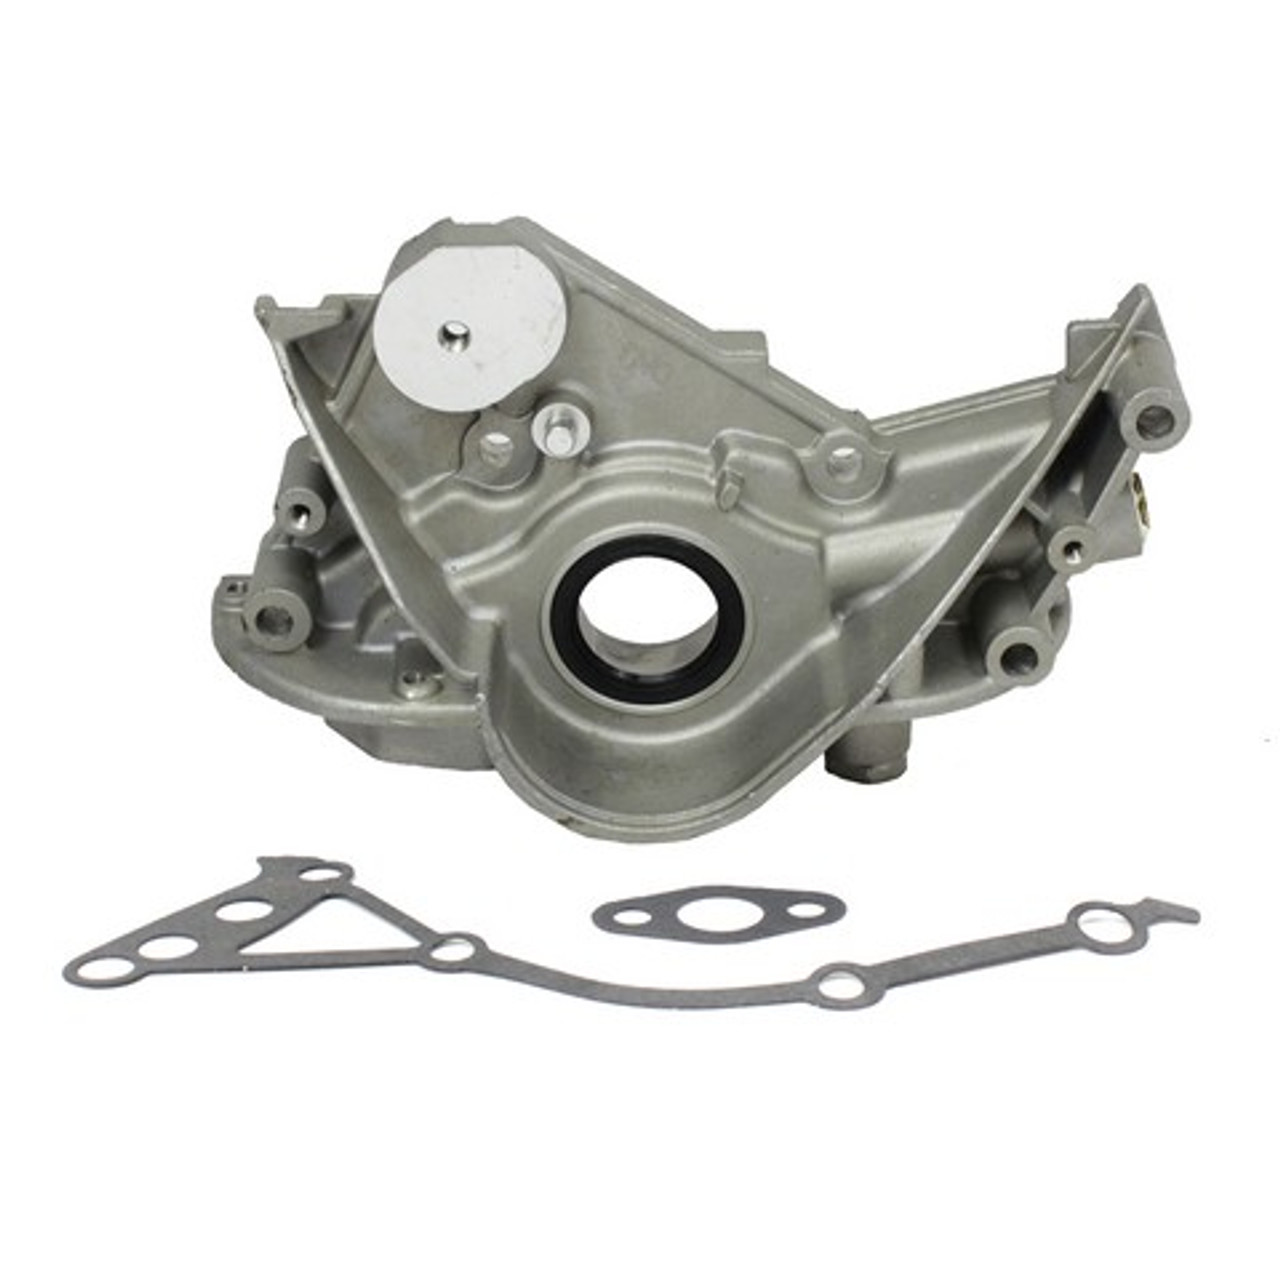 Oil Pump 3.0L 1990 Plymouth Grand Voyager - OP125.68